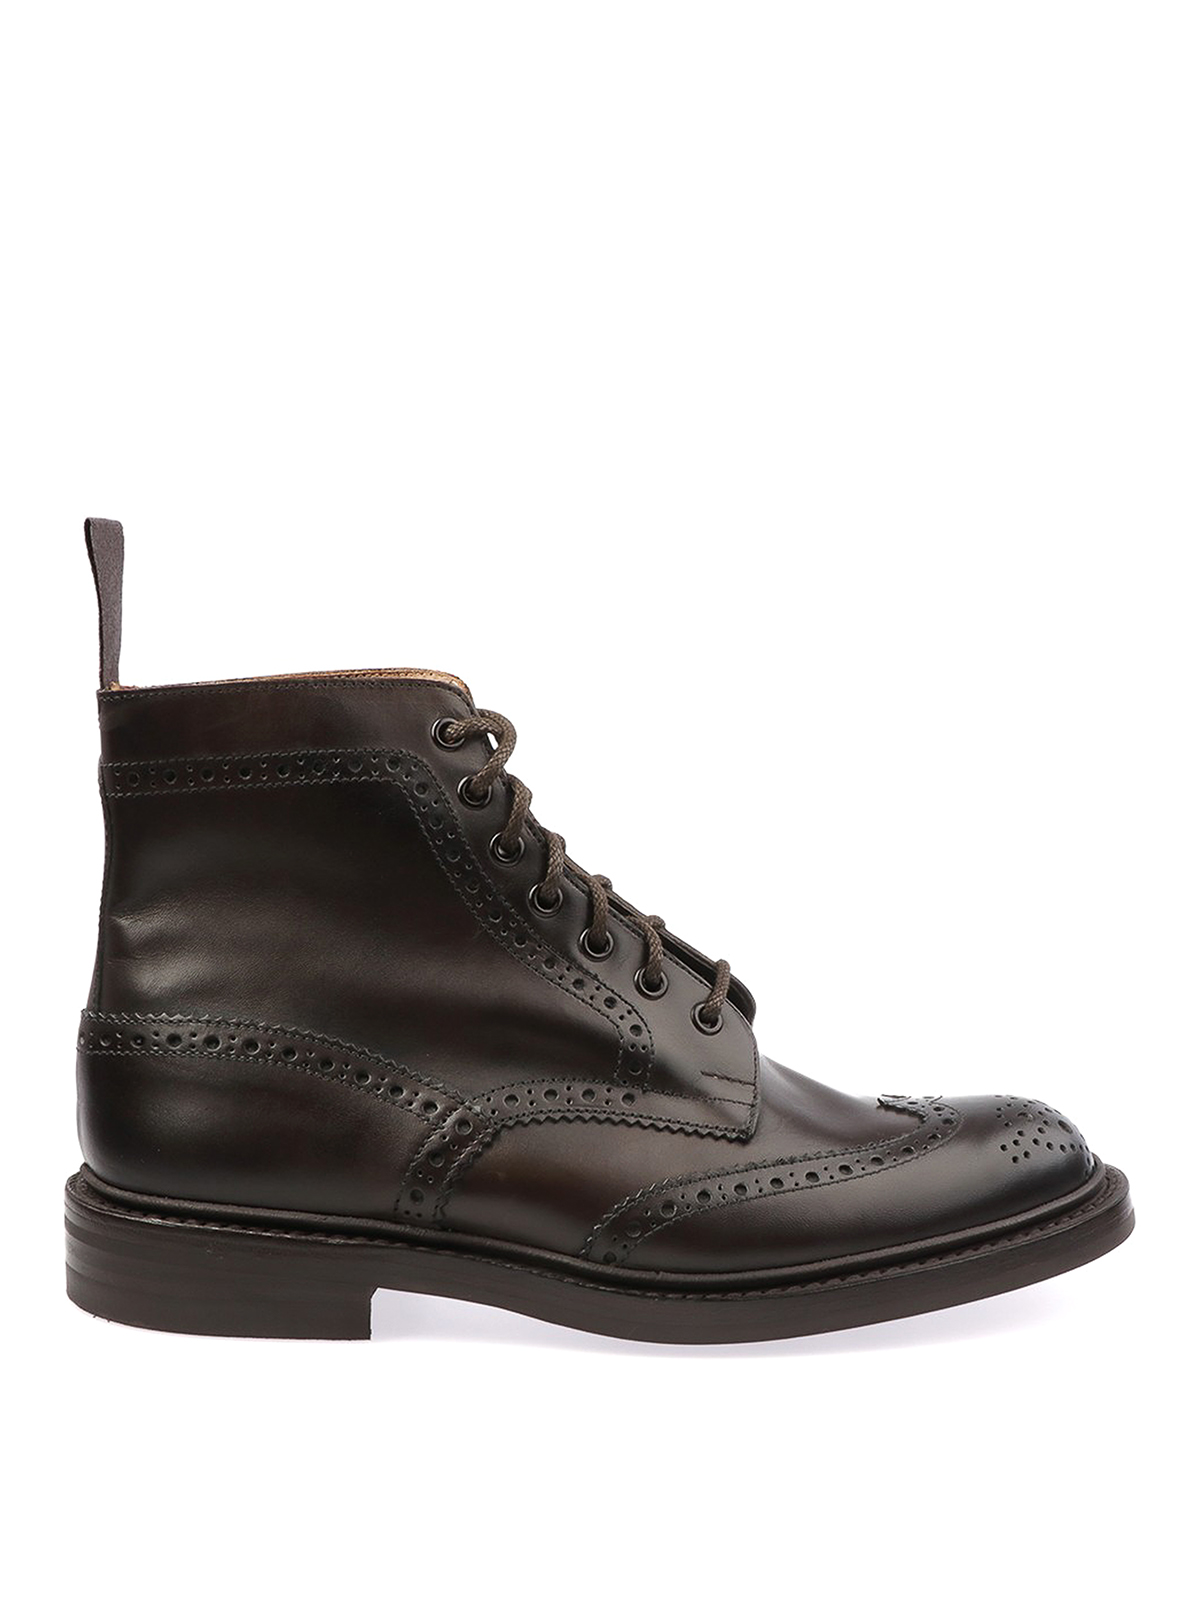 Tricker's Stow Ankle Boots In Dark Brown